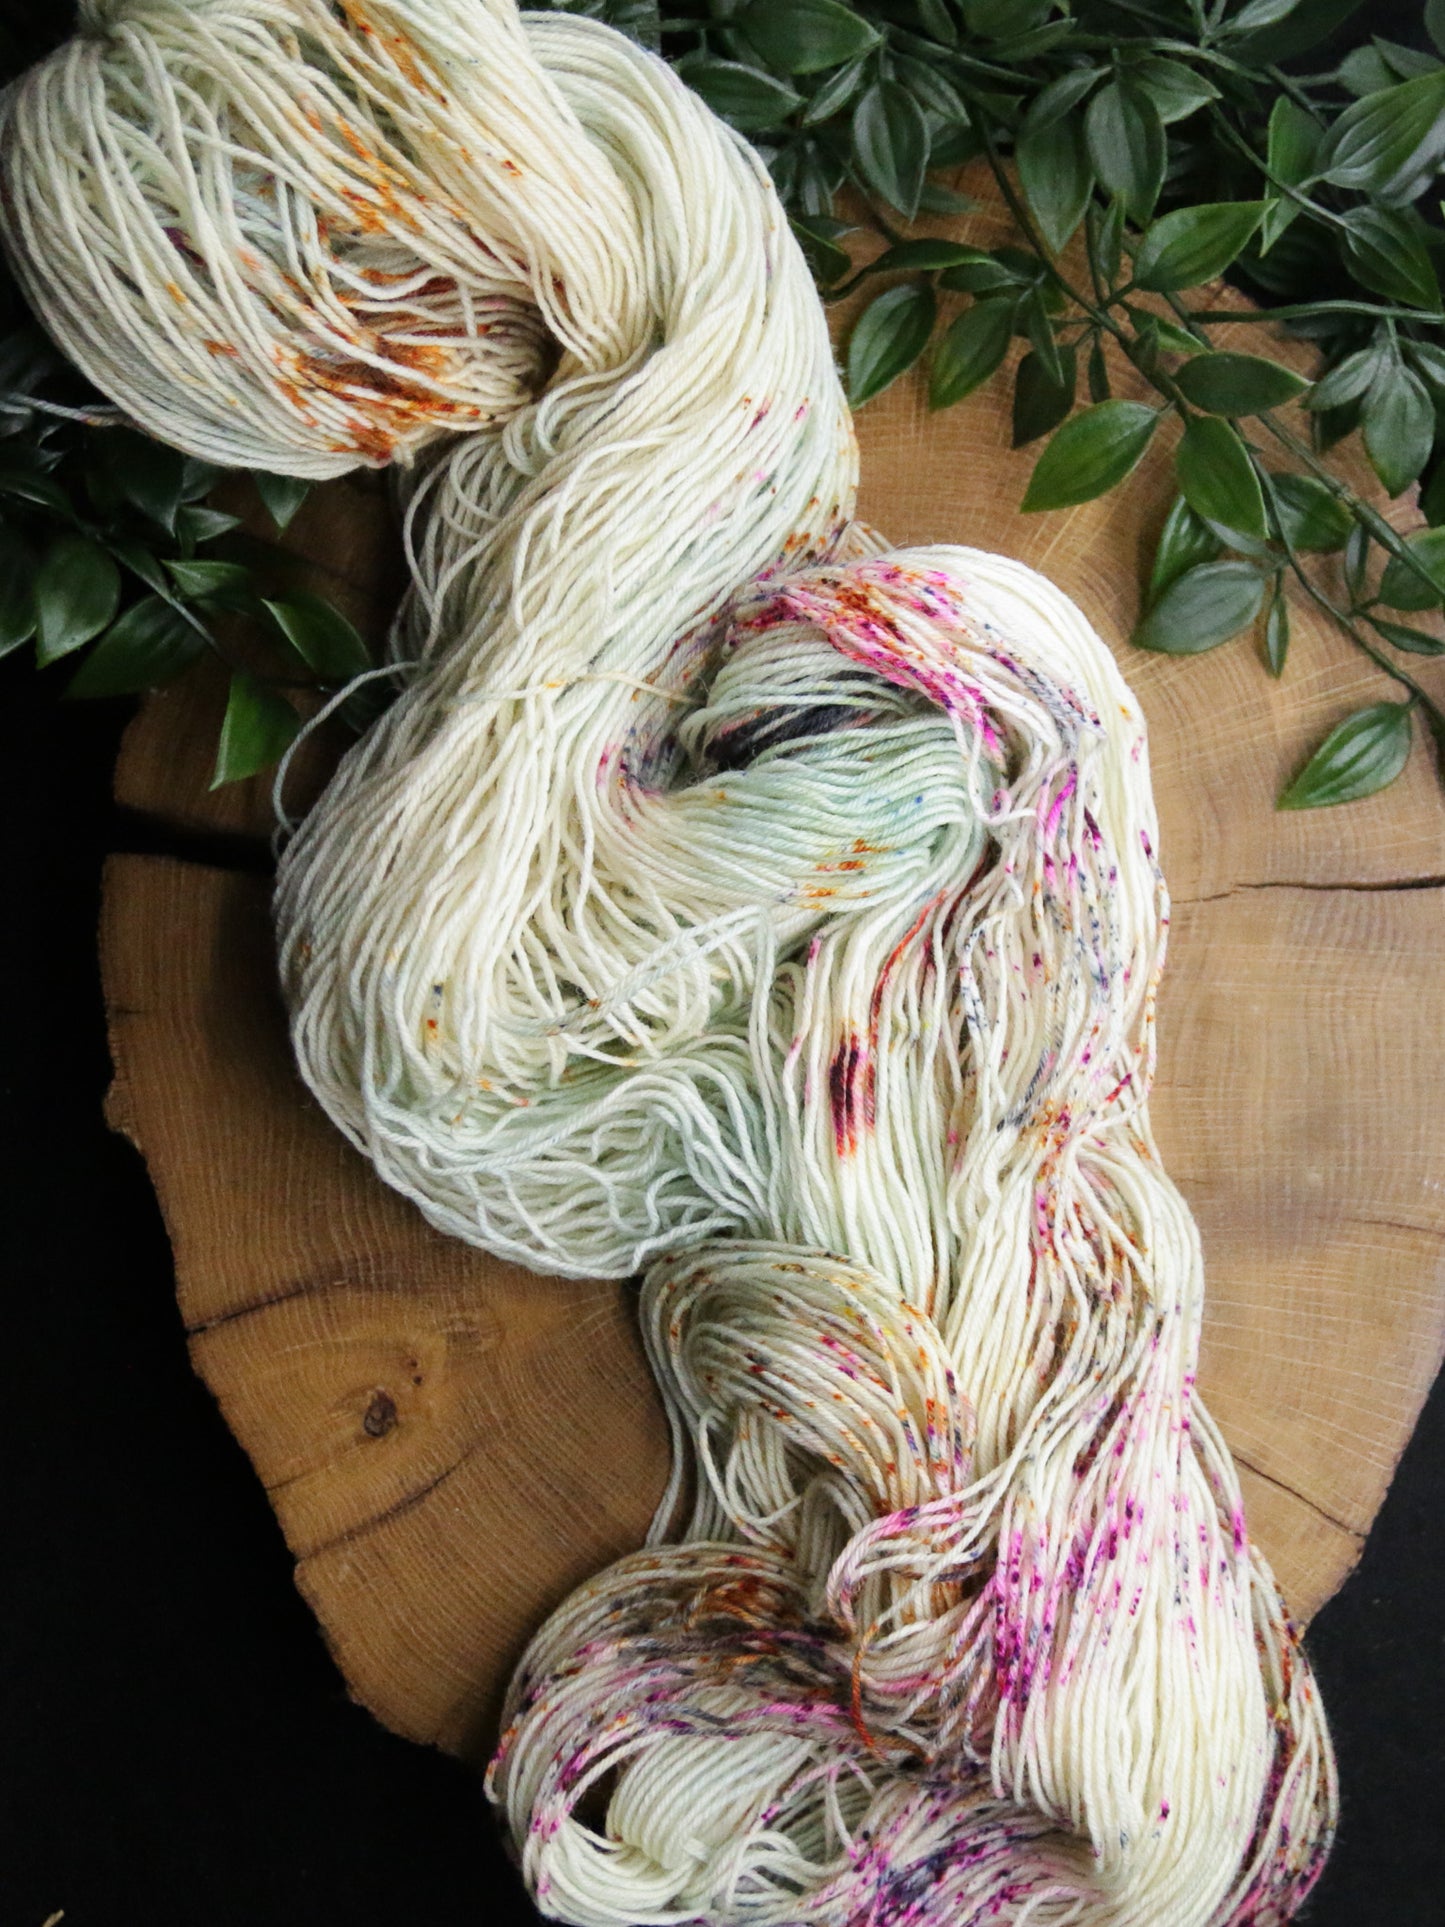 Fairy Ring - Sweater Quantity and Dyed to Order